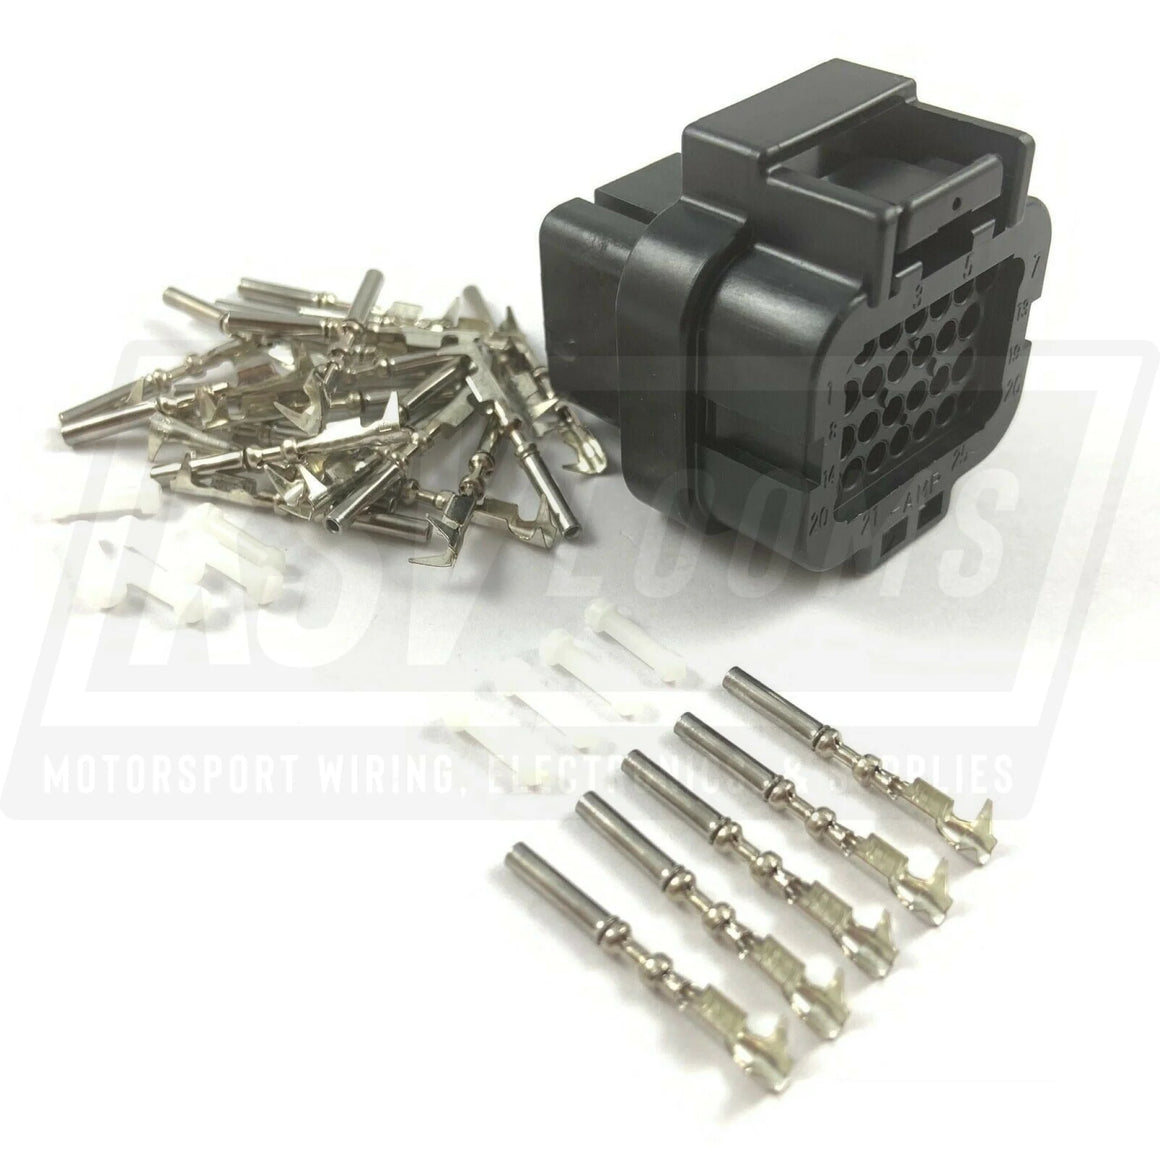 26-Way Connector Kit For Fueltech Ft450 Ecu (24-20 Awg)